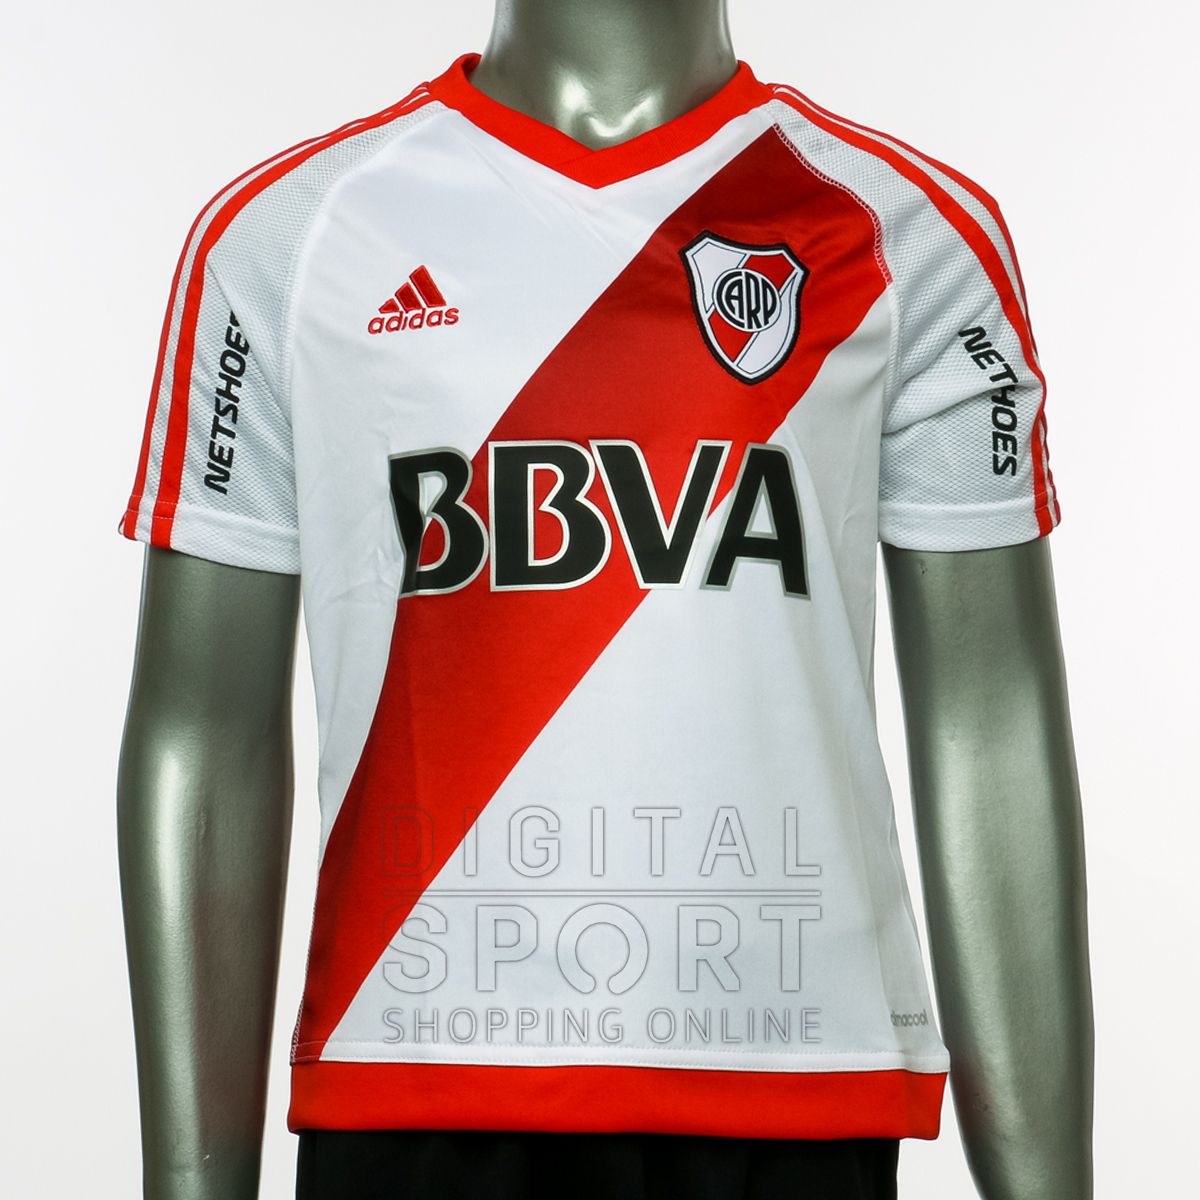 Camiseta River Plate Niño Top Sellers, UP TO 62% OFF | www.apmusicales.com